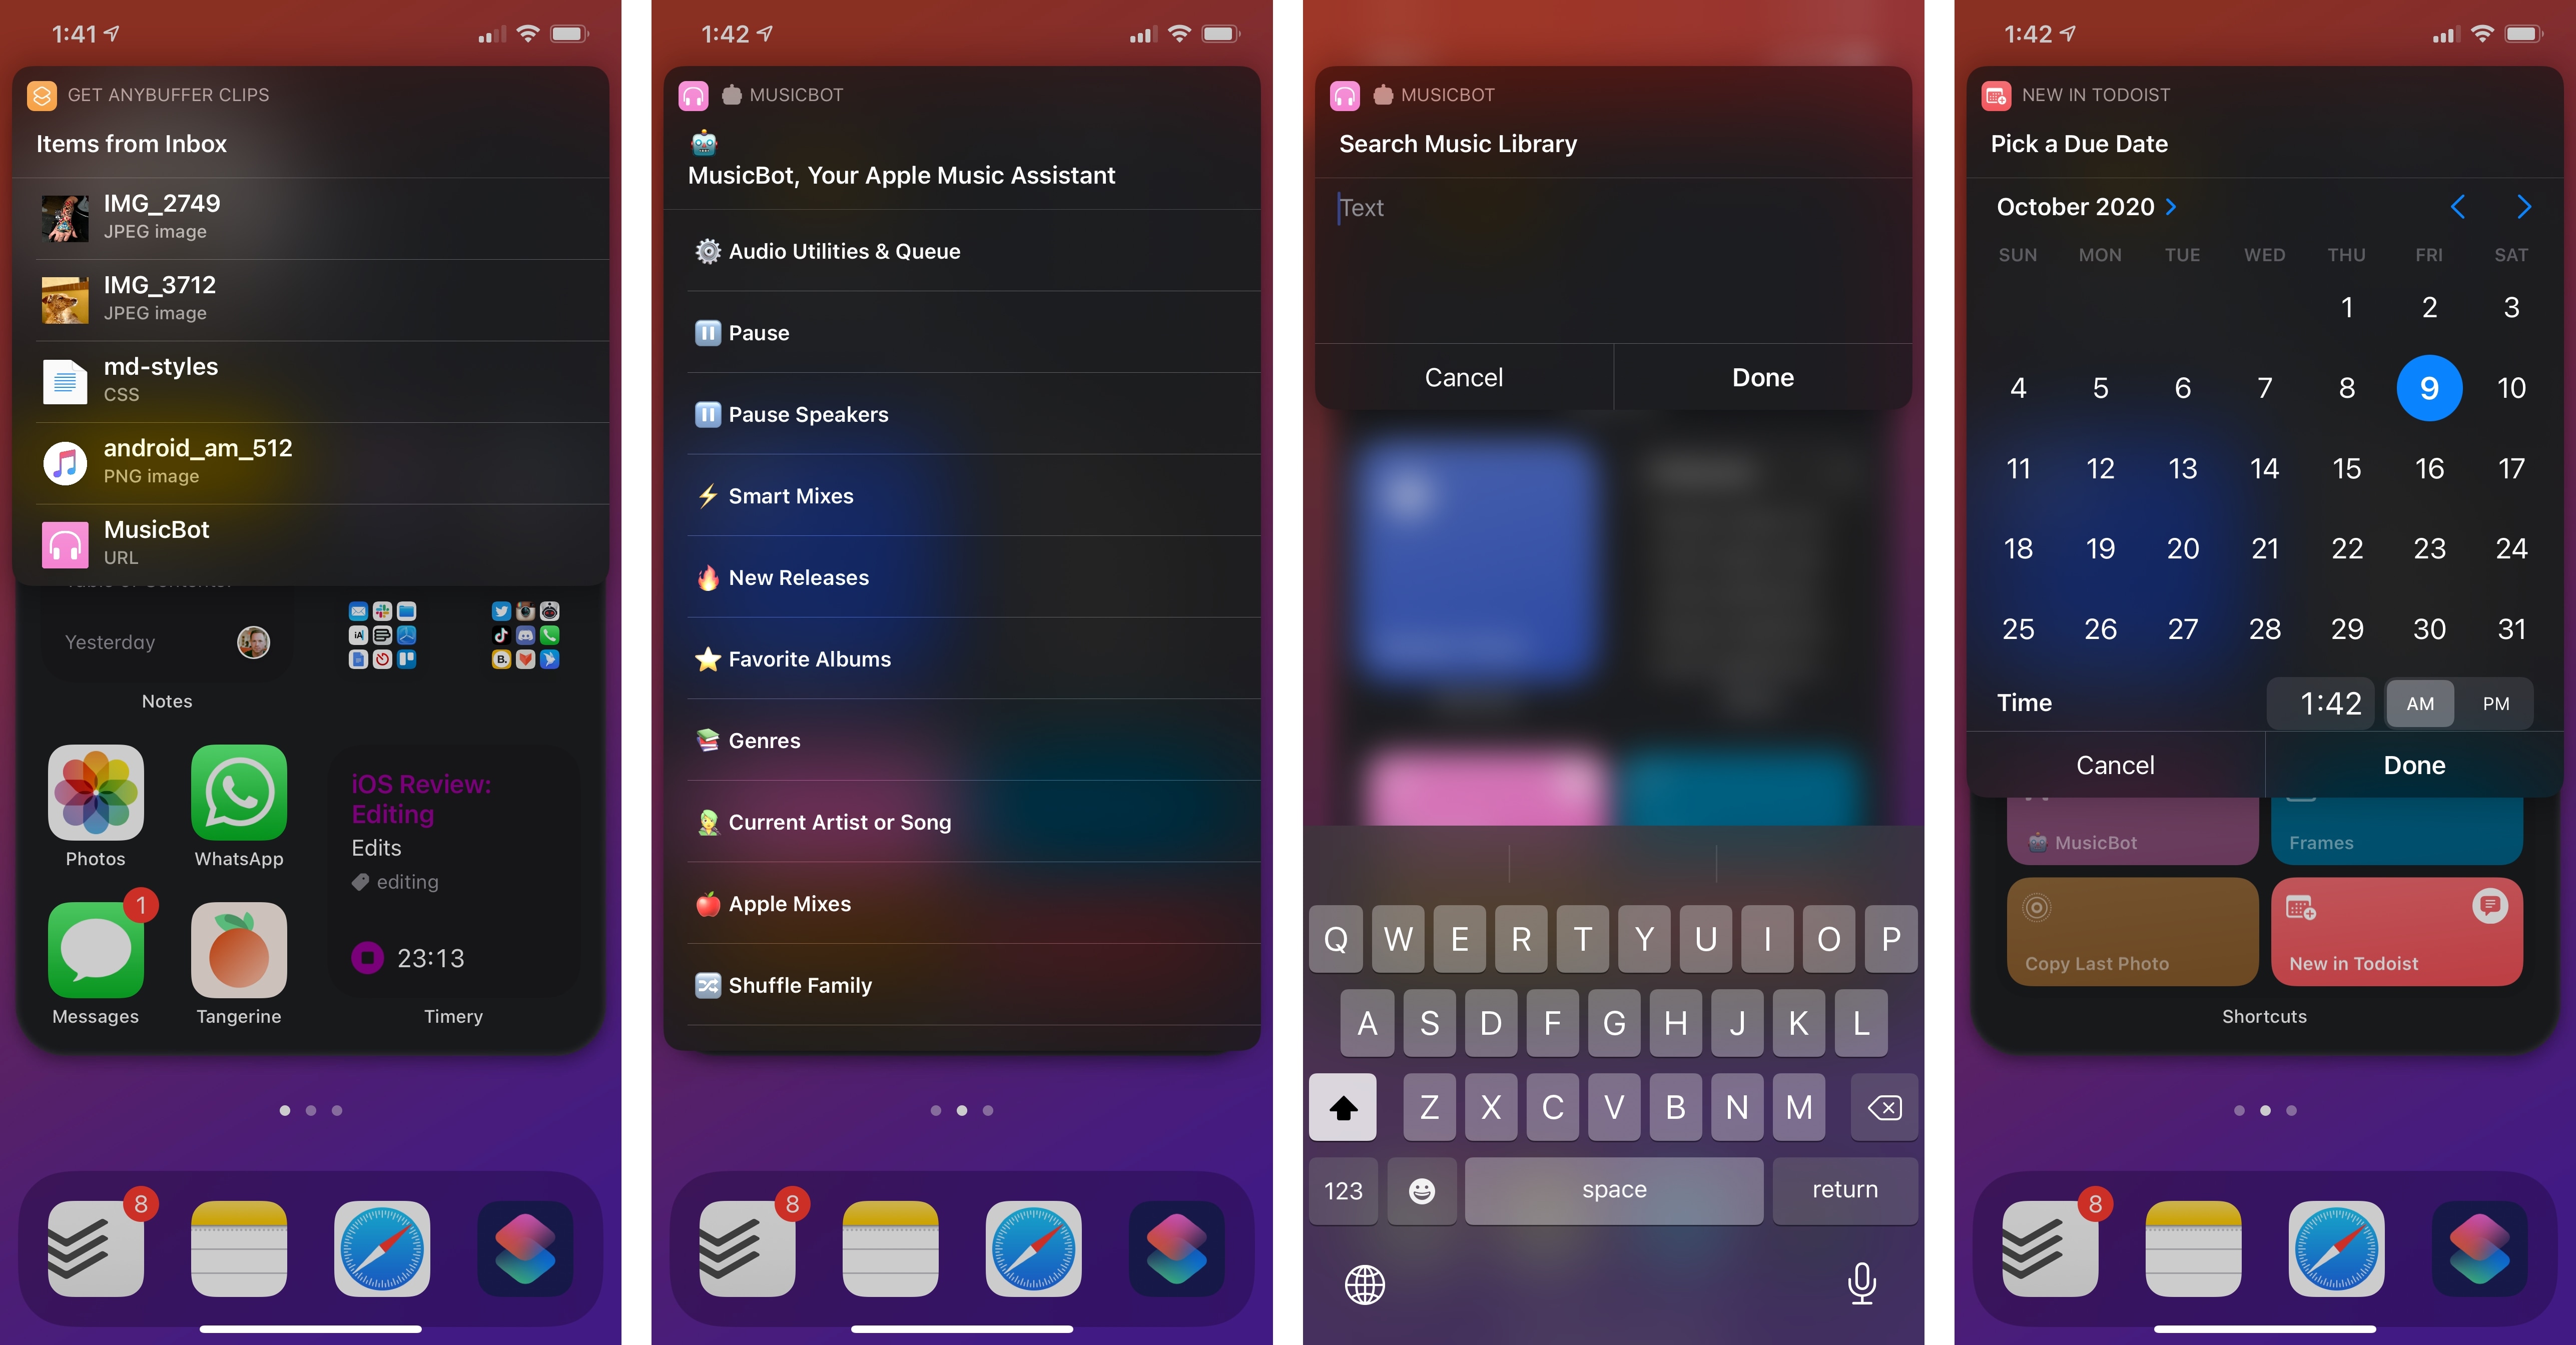 Examples of shortcuts running with compact UI from the Home Screen.